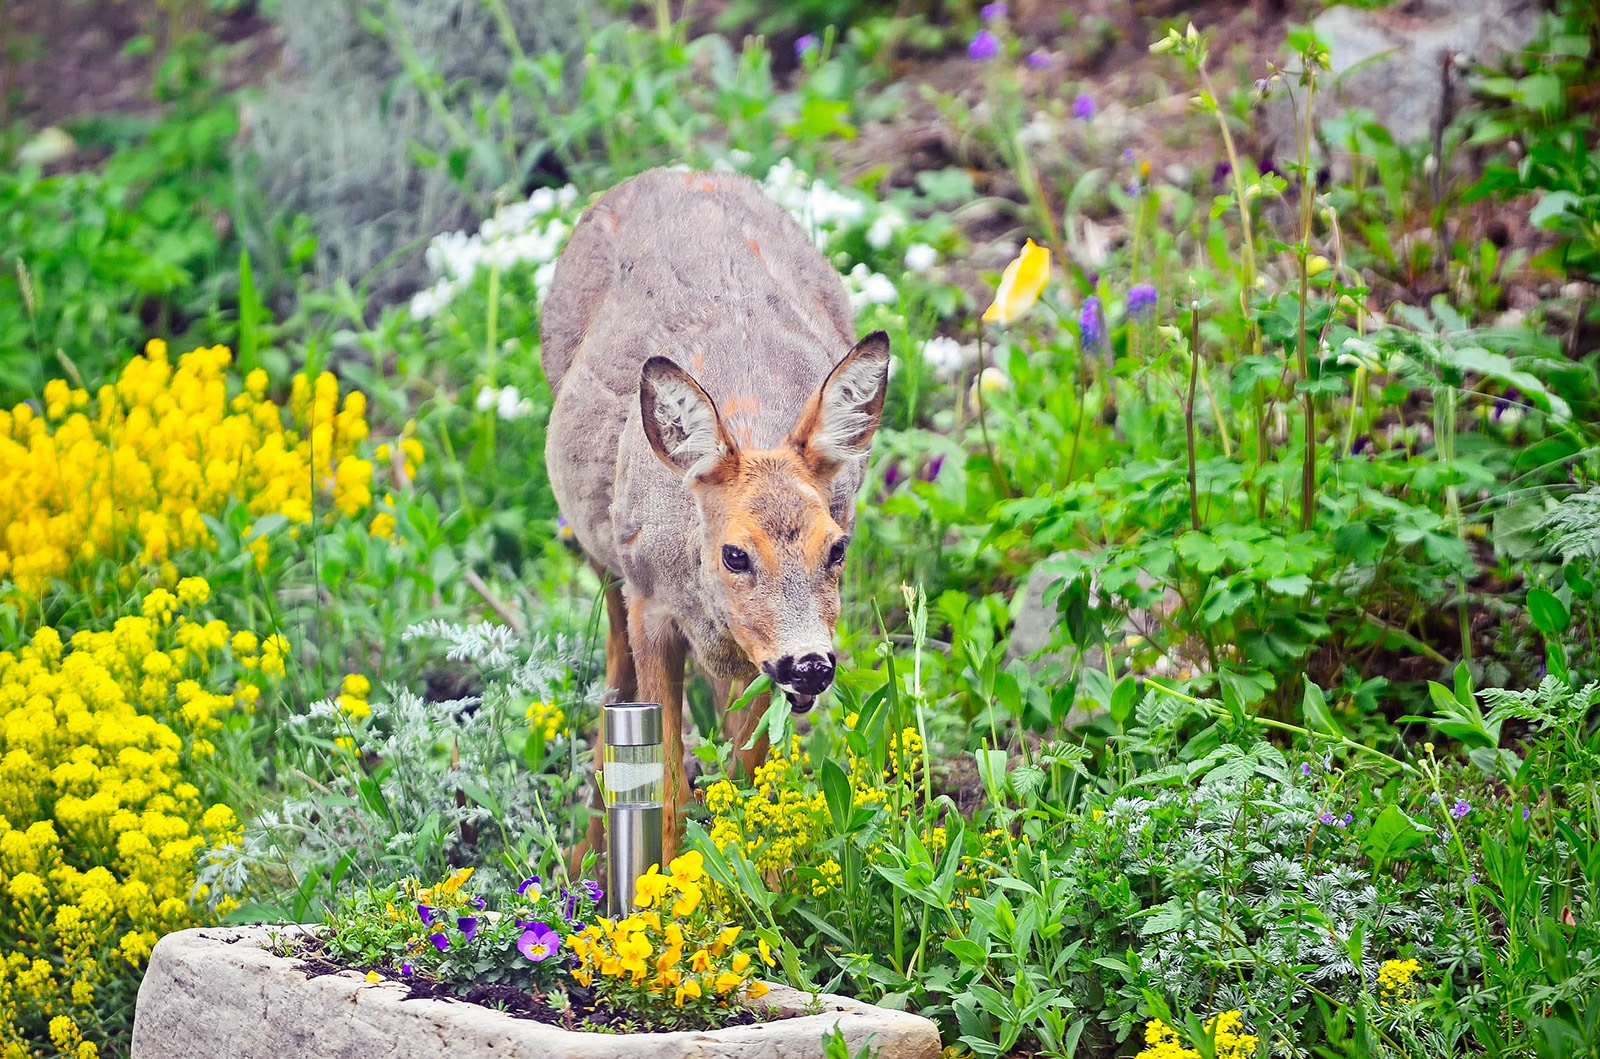 Super effective and humane ways to keep deer out of your garden